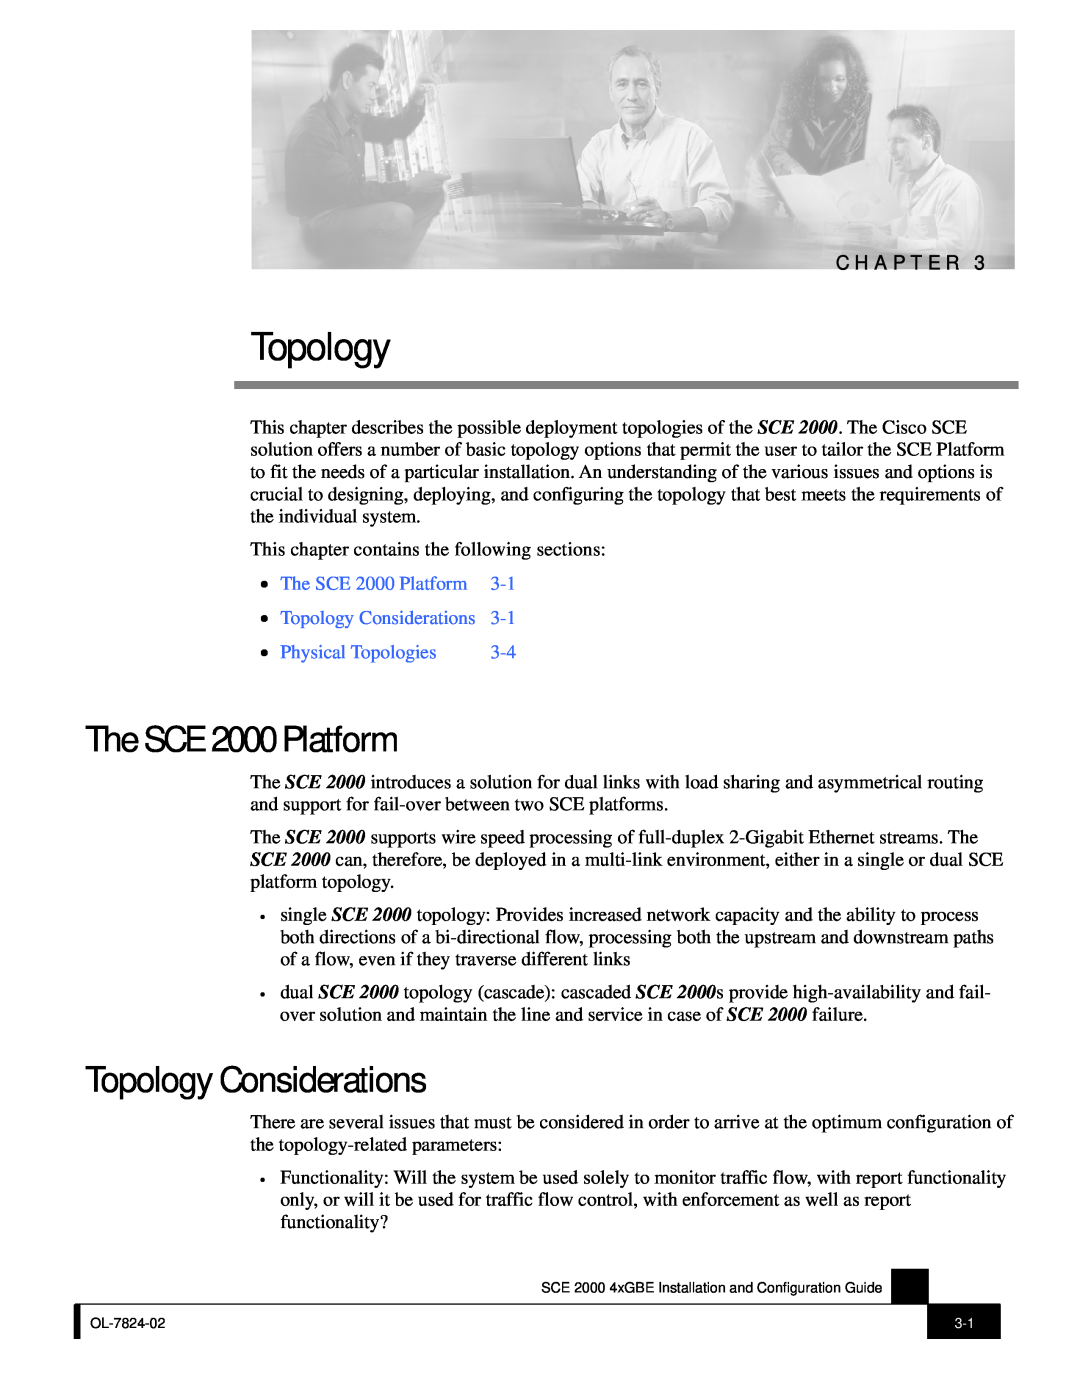 Cisco Systems SCE 2000 4xGBE manual The SCE 2000 Platform, Topology Considerations, Physical Topologies, C H A P T E R 